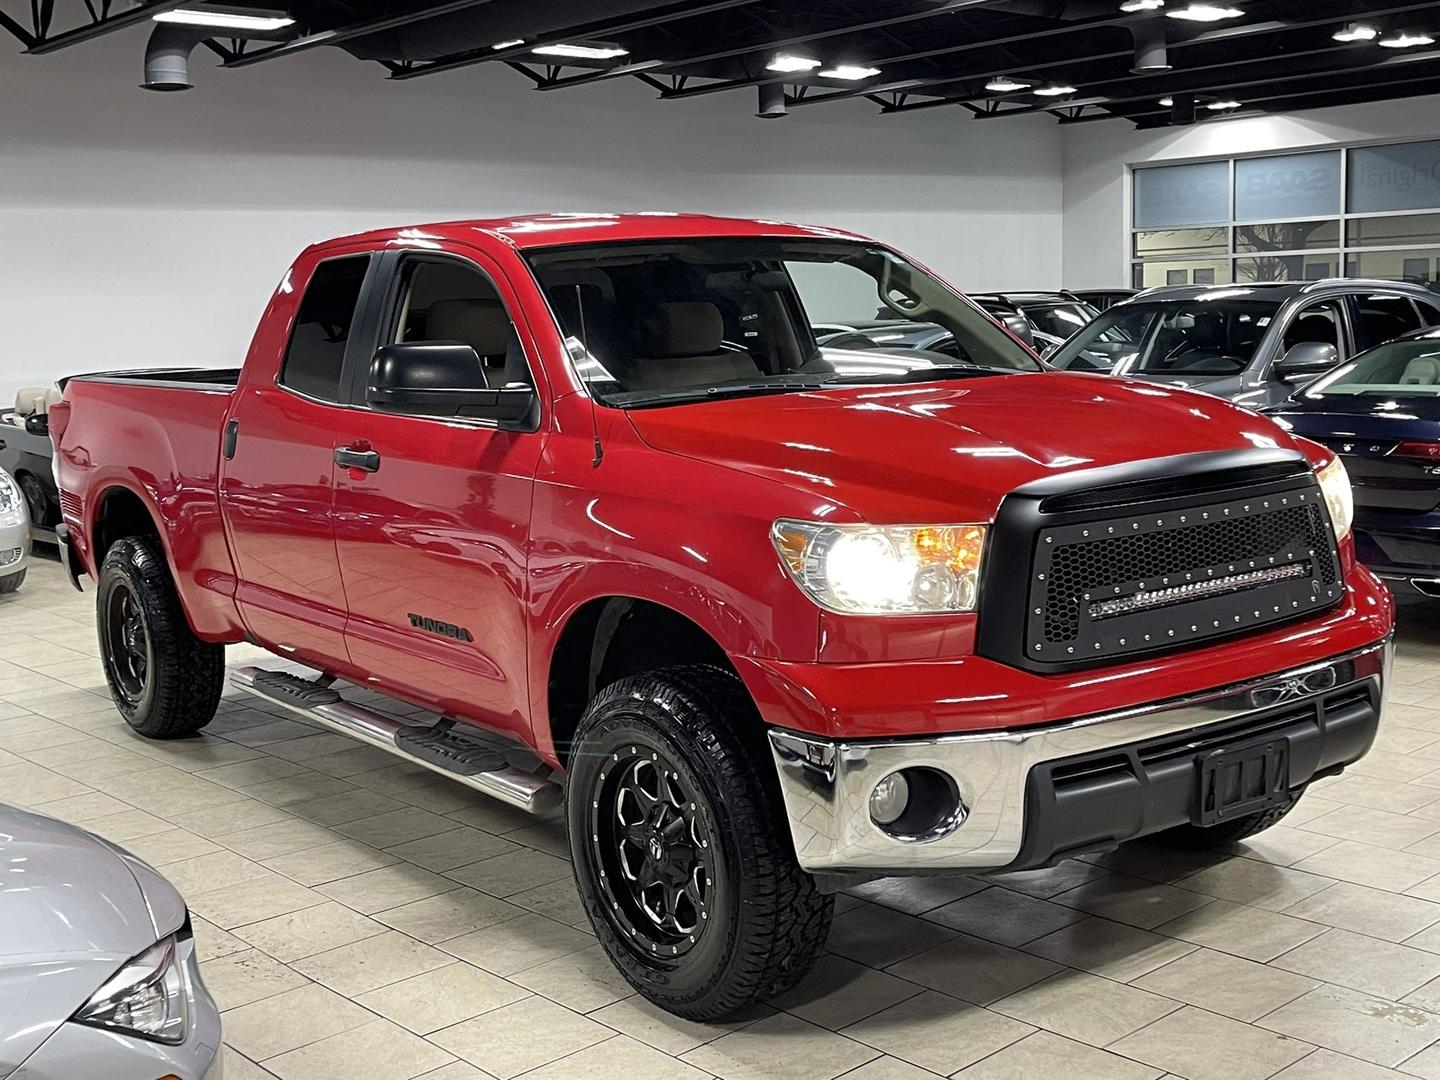 USED TOYOTA TUNDRA DOUBLE CAB 2011 for sale in Downers Grove, IL | Star